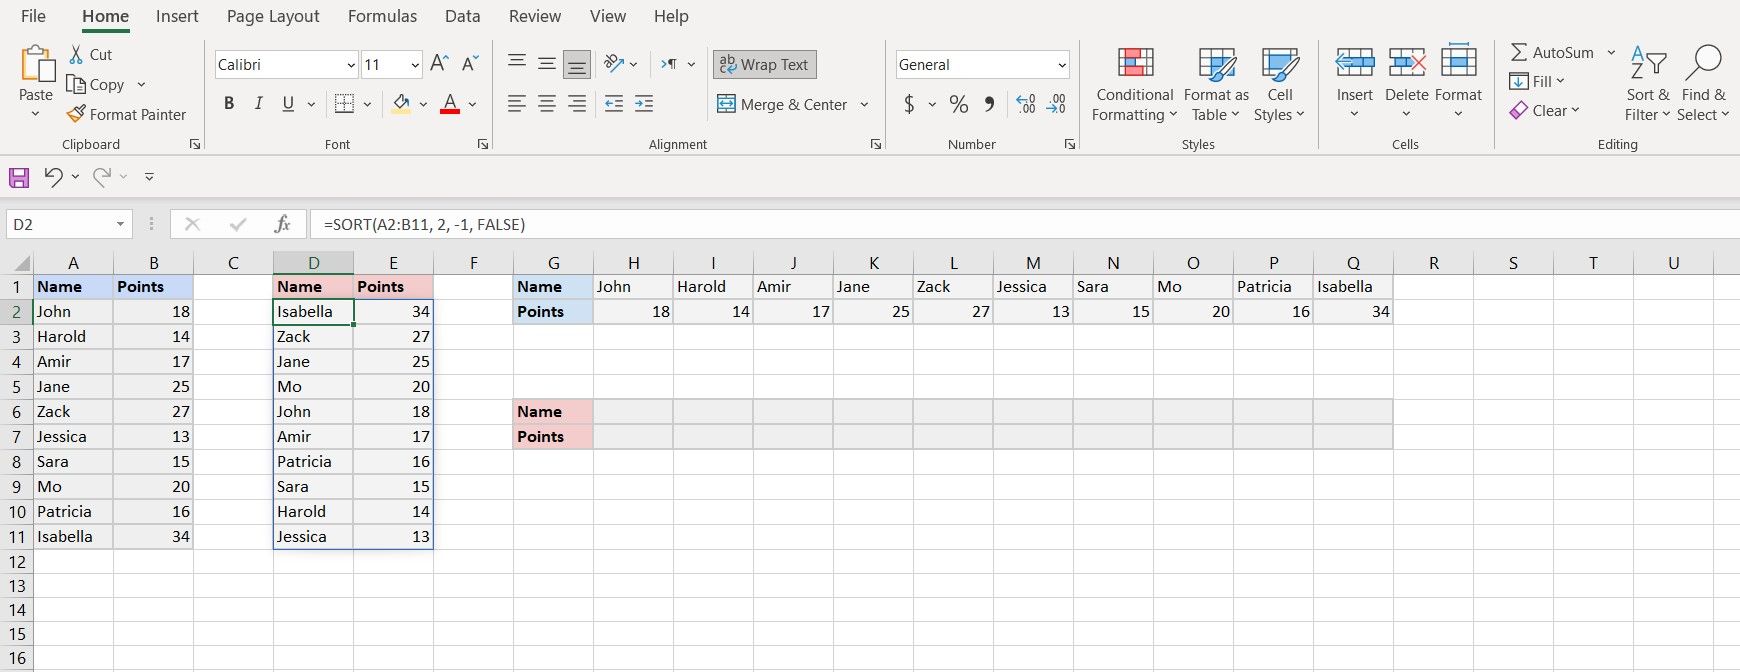 How To Sort Data In Excel With The Sort Function 3802